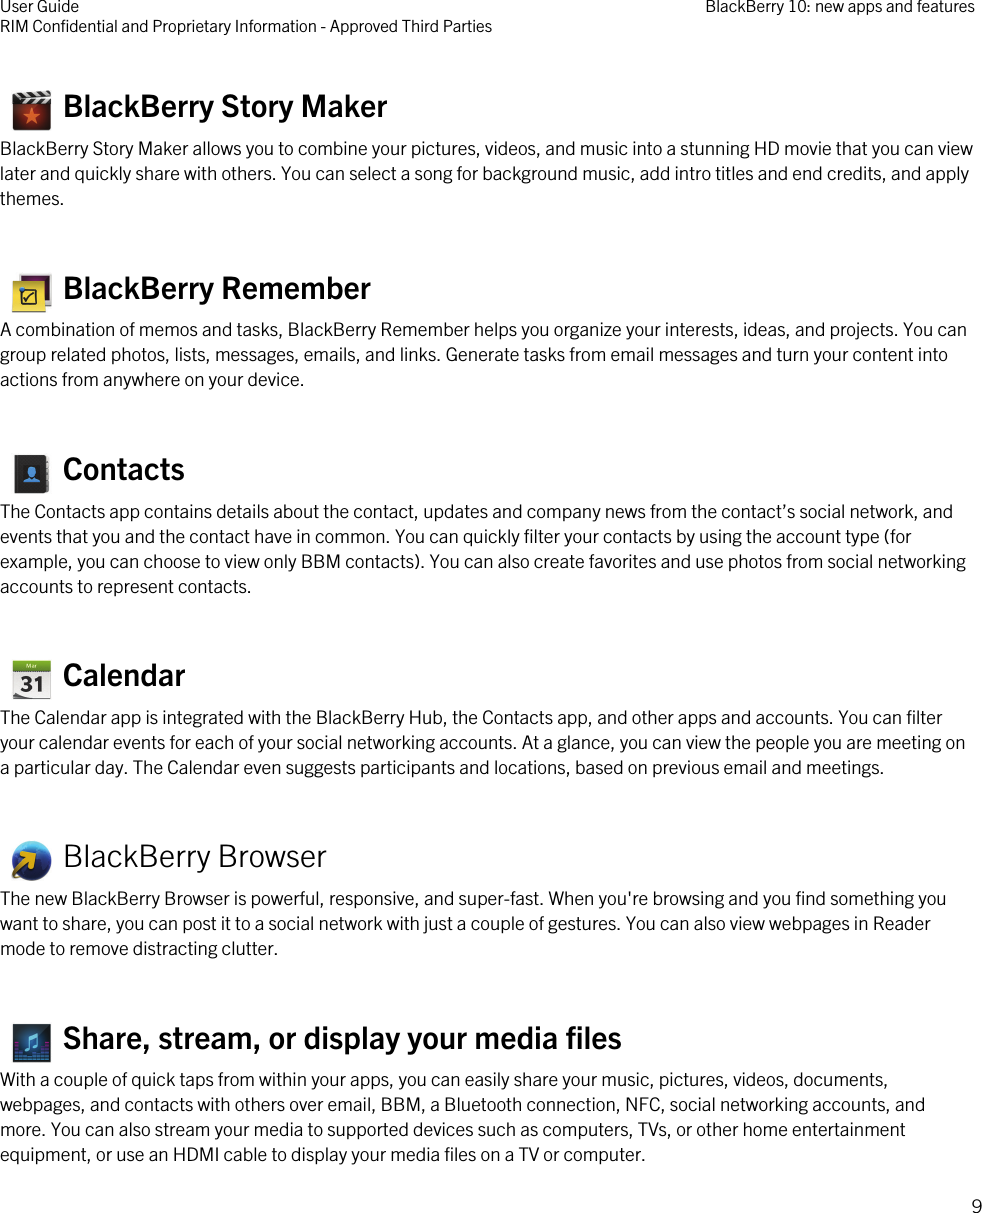    BlackBerry Story MakerBlackBerry Story Maker allows you to combine your pictures, videos, and music into a stunning HD movie that you can viewlater and quickly share with others. You can select a song for background music, add intro titles and end credits, and applythemes.   BlackBerry RememberA combination of memos and tasks, BlackBerry Remember helps you organize your interests, ideas, and projects. You cangroup related photos, lists, messages, emails, and links. Generate tasks from email messages and turn your content intoactions from anywhere on your device.  ContactsThe Contacts app contains details about the contact, updates and company news from the contact’s social network, andevents that you and the contact have in common. You can quickly filter your contacts by using the account type (forexample, you can choose to view only BBM contacts). You can also create favorites and use photos from social networkingaccounts to represent contacts.   CalendarThe Calendar app is integrated with the BlackBerry Hub, the Contacts app, and other apps and accounts. You can filteryour calendar events for each of your social networking accounts. At a glance, you can view the people you are meeting ona particular day. The Calendar even suggests participants and locations, based on previous email and meetings.   BlackBerry BrowserThe new BlackBerry Browser is powerful, responsive, and super-fast. When you&apos;re browsing and you find something youwant to share, you can post it to a social network with just a couple of gestures. You can also view webpages in Readermode to remove distracting clutter.   Share, stream, or display your media filesWith a couple of quick taps from within your apps, you can easily share your music, pictures, videos, documents,webpages, and contacts with others over email, BBM, a Bluetooth connection, NFC, social networking accounts, andmore. You can also stream your media to supported devices such as computers, TVs, or other home entertainmentequipment, or use an HDMI cable to display your media files on a TV or computer.User GuideRIM Confidential and Proprietary Information - Approved Third Parties BlackBerry 10: new apps and features9